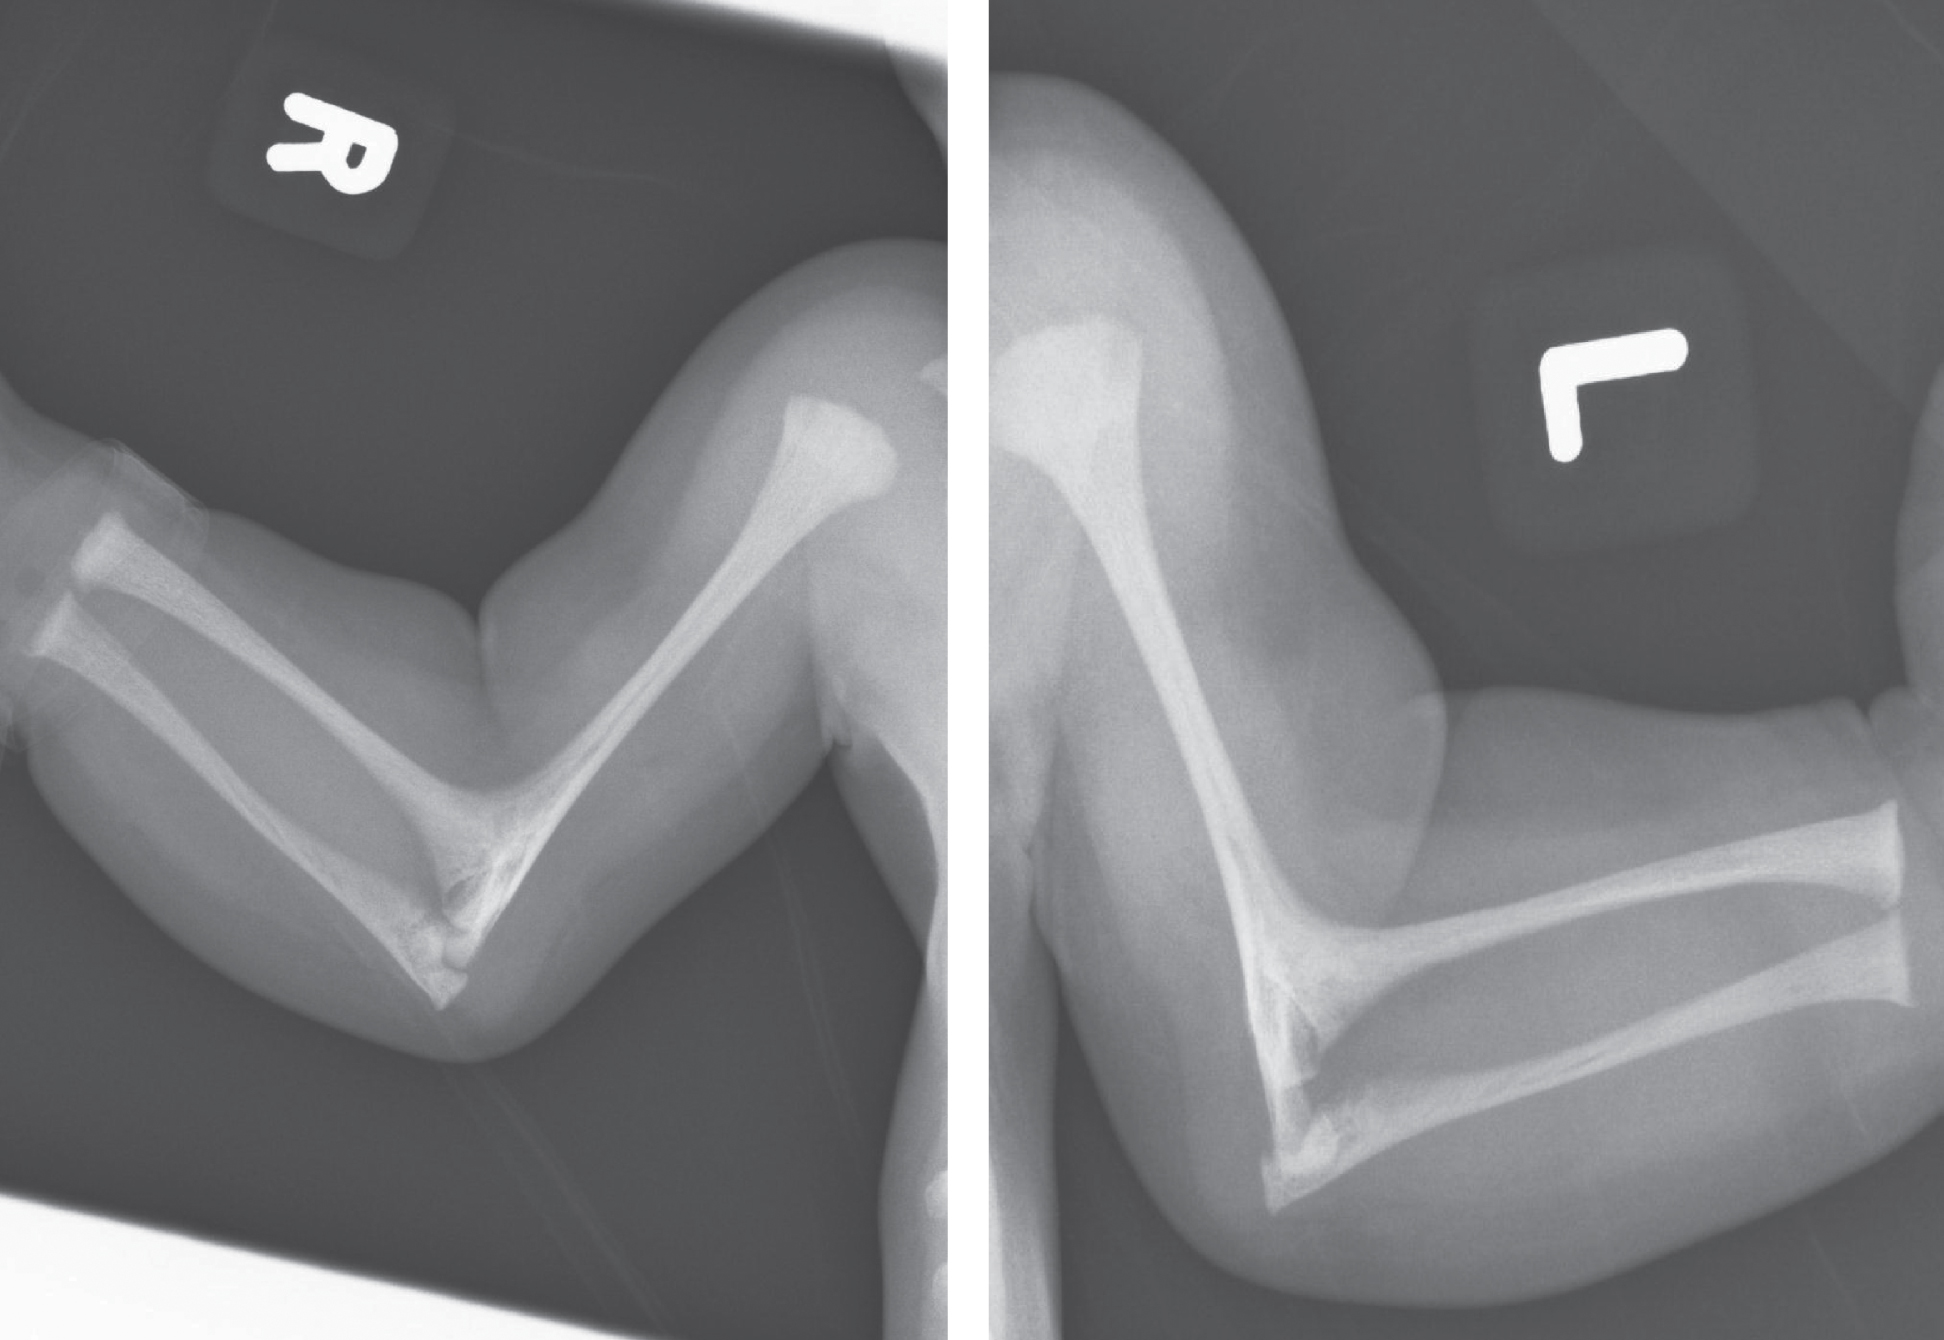 Radiographs of right and left upper limbs in the patient from Fig. 11 showing bilateral radiohumeral synostosis. (Courtesy from Malgorzata J.M. Nowaczyk, MD, McMaster University, Hamilton, Canada).